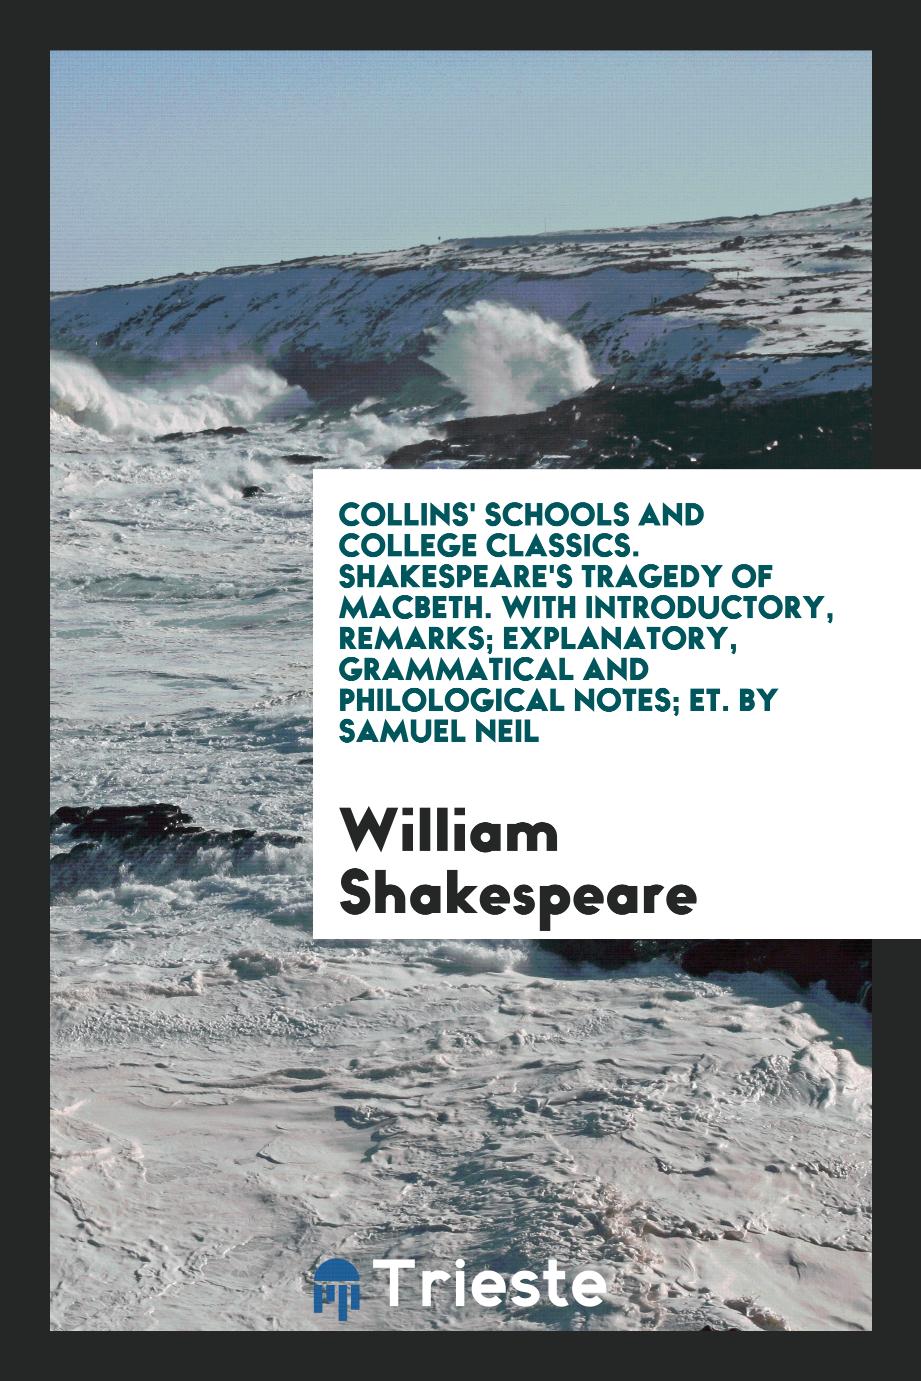 Collins' Schools and College Classics. Shakespeare's tragedy of Macbeth. With Introductory, Remarks; Explanatory, Grammatical and Philological Notes; Etс. By Samuel Neil